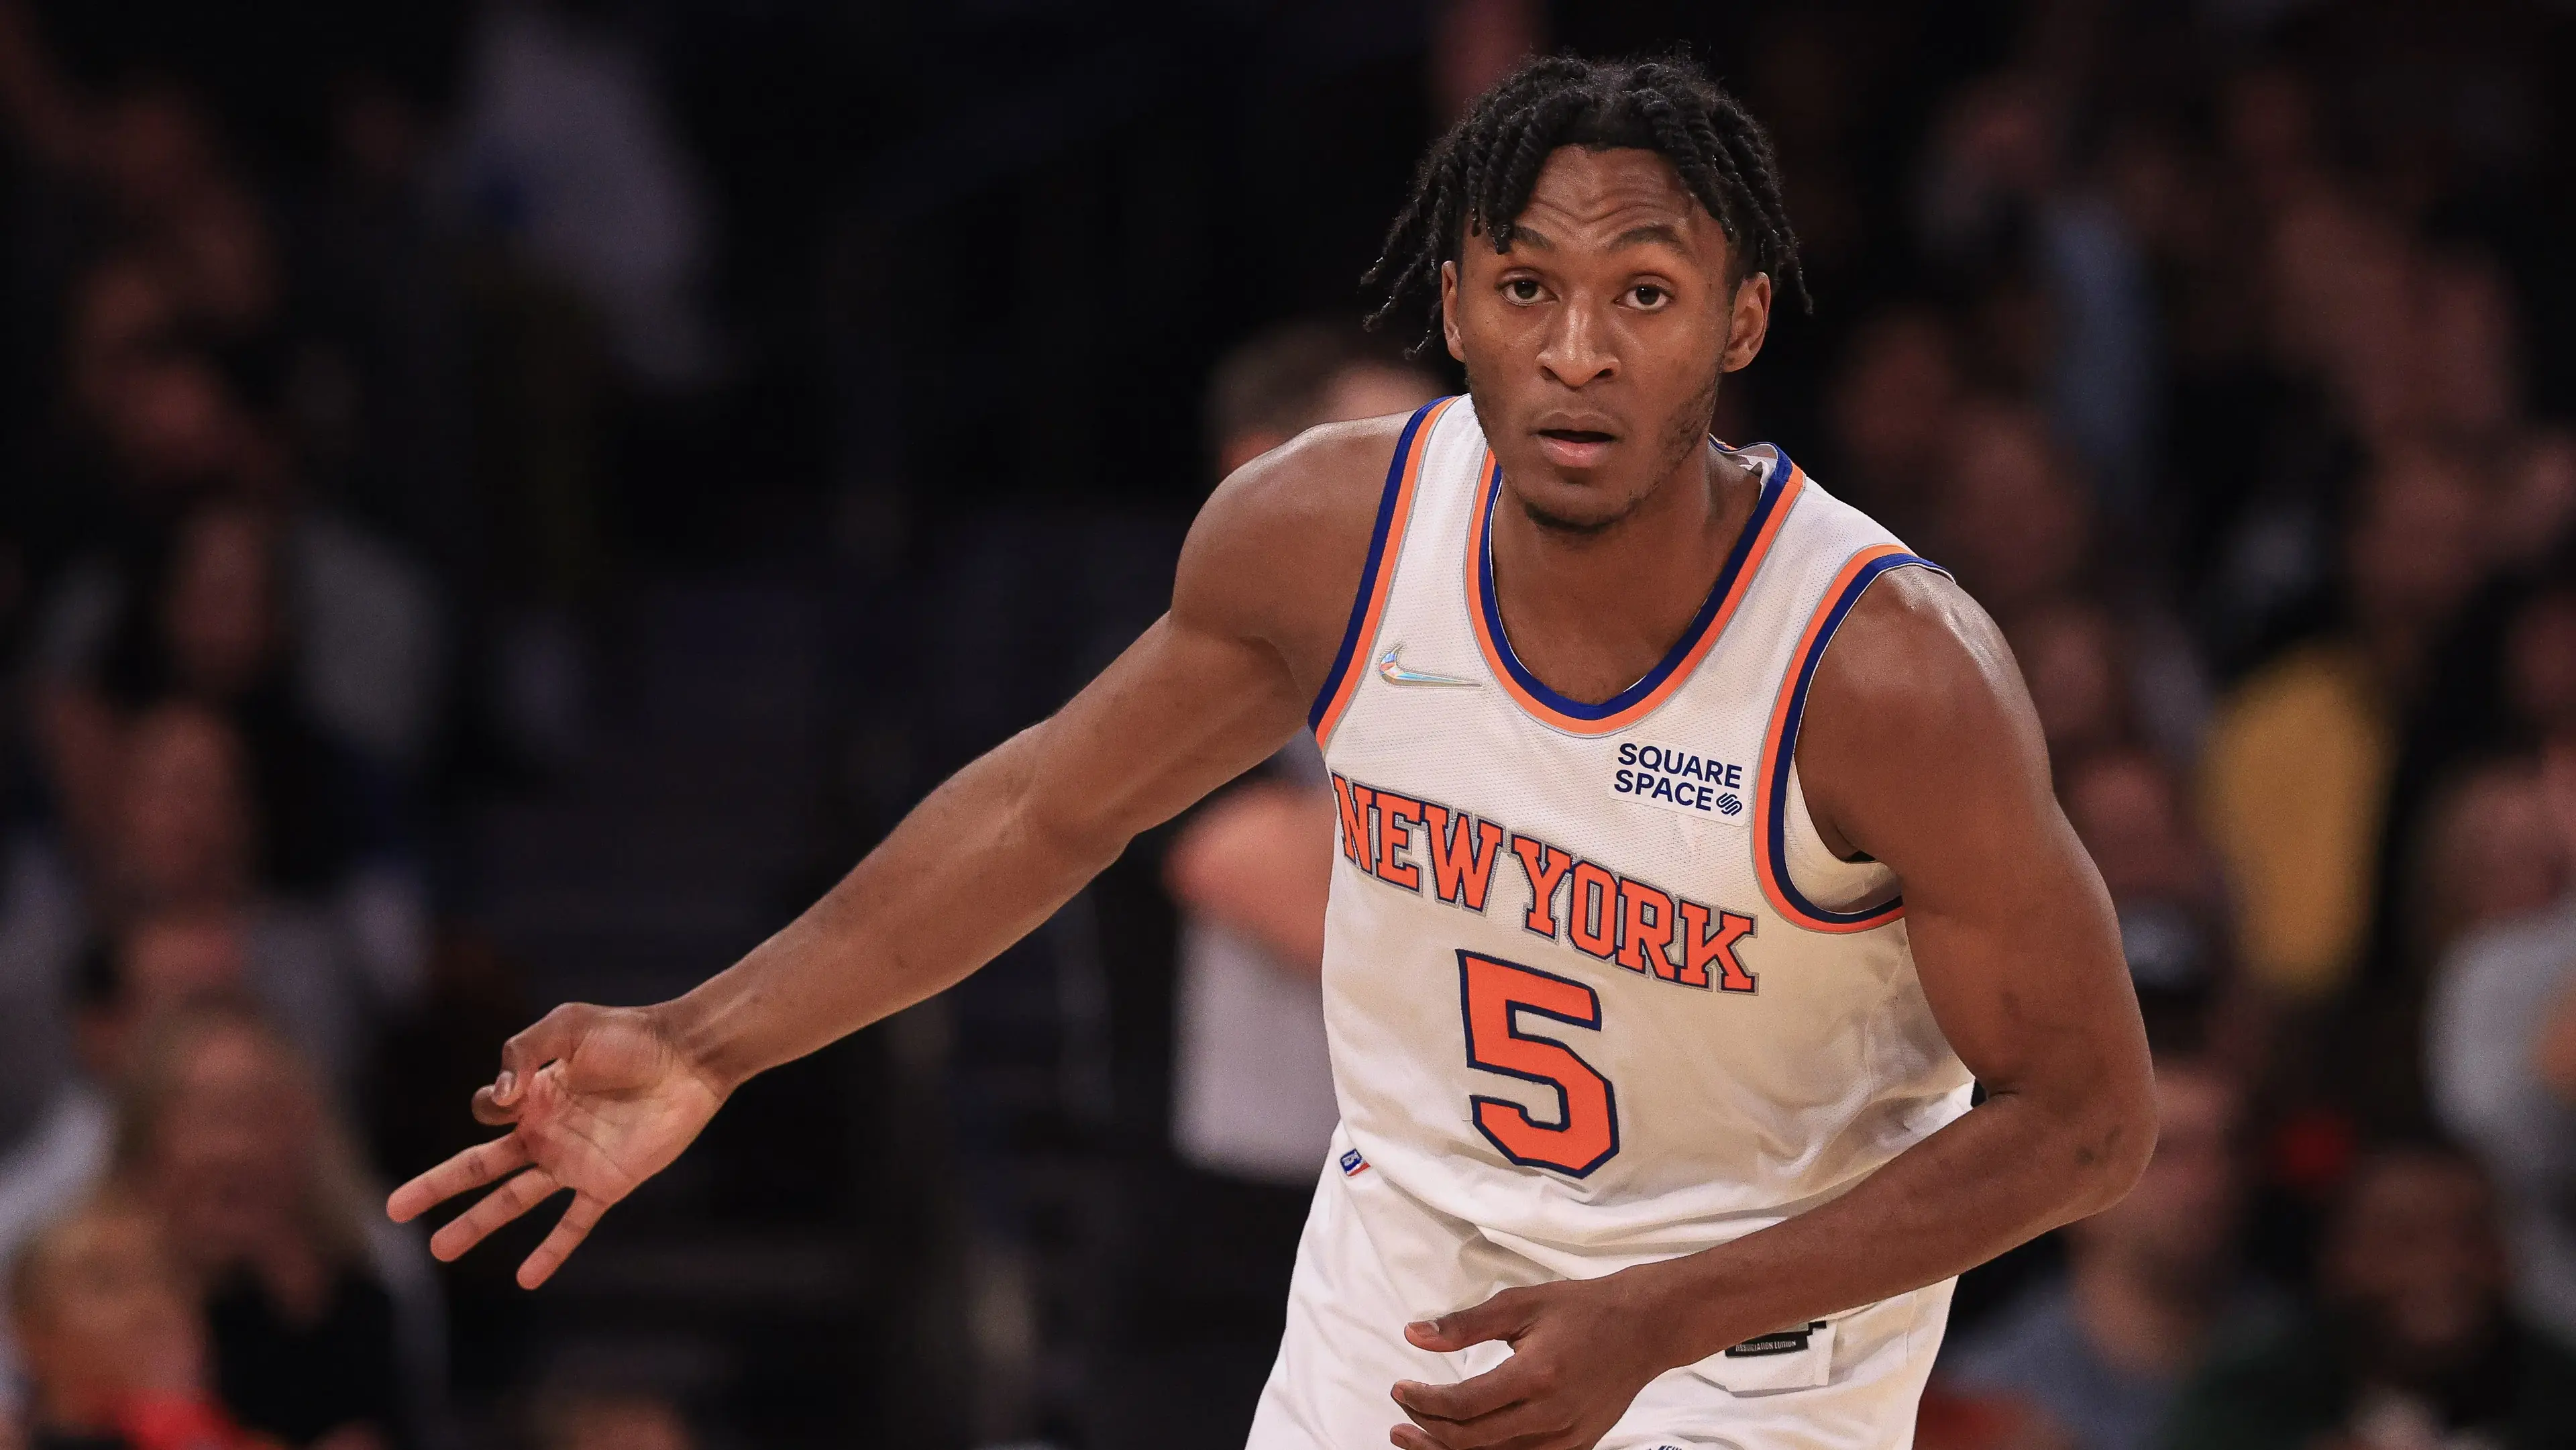 Nov 15, 2021; New York, New York, USA; New York Knicks guard Immanuel Quickley (5) reacts after making a three point basket against the Indiana Pacers during the first half at Madison Square Garden. Mandatory Credit: Vincent Carchietta-USA TODAY Sports / Vincent Carchietta-USA TODAY Sports